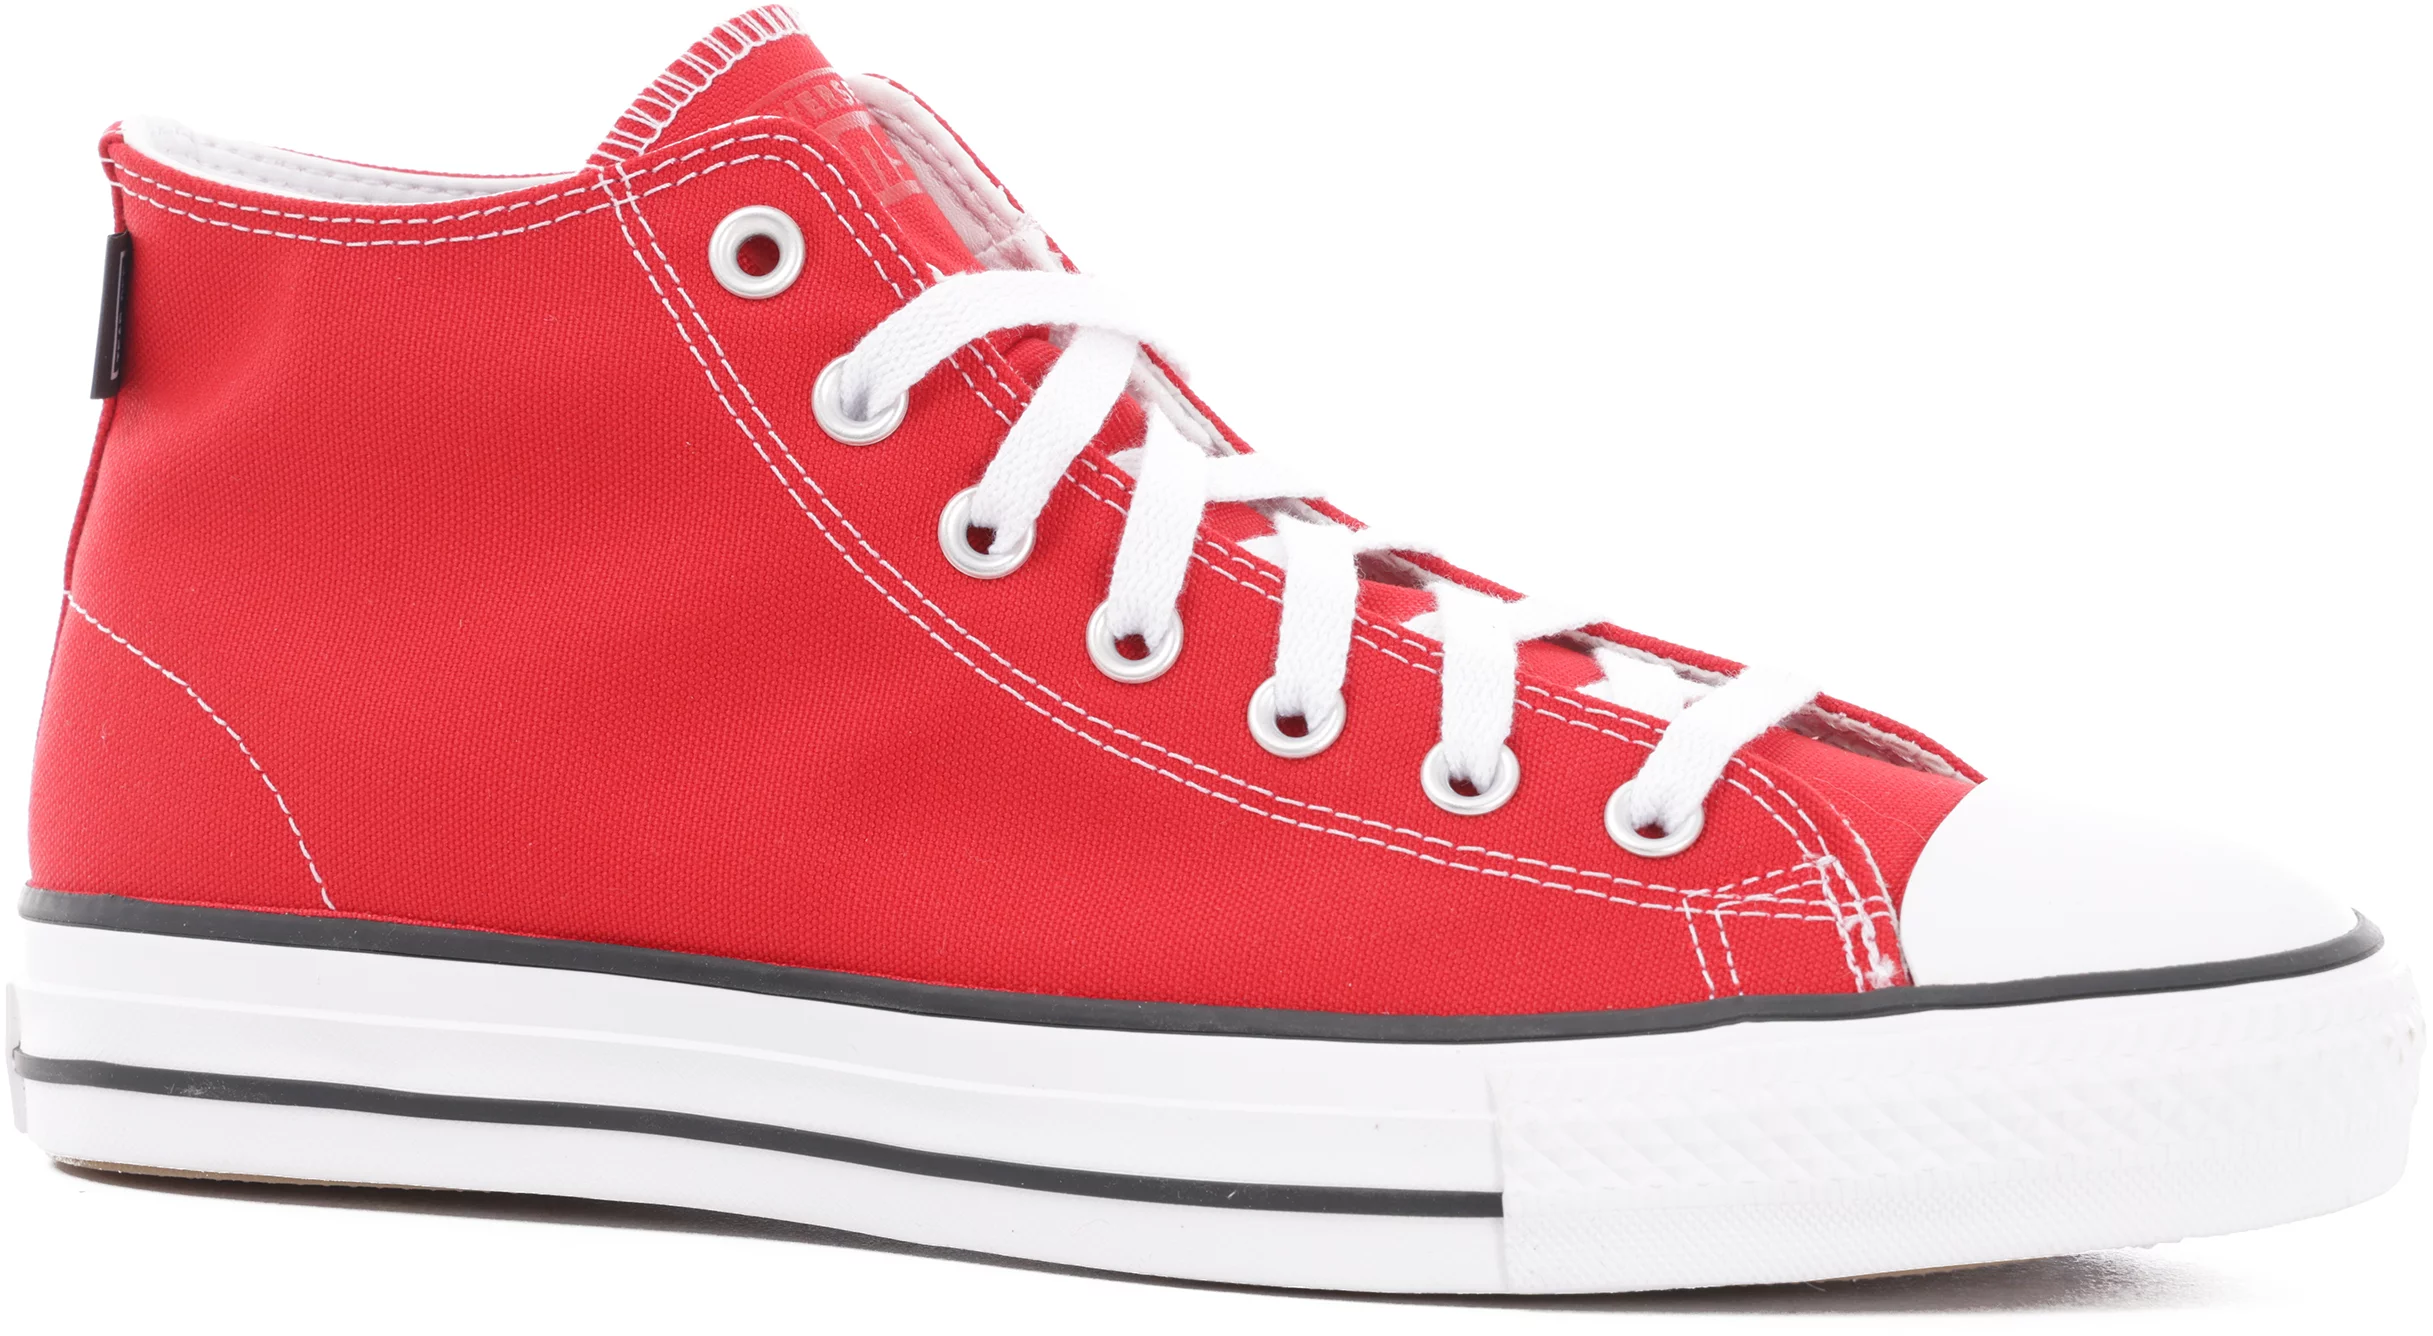 Søjle studie Hårdhed Converse Chuck Taylor All Star Pro Mid Skate Shoes - university red/white/ black | Tactics